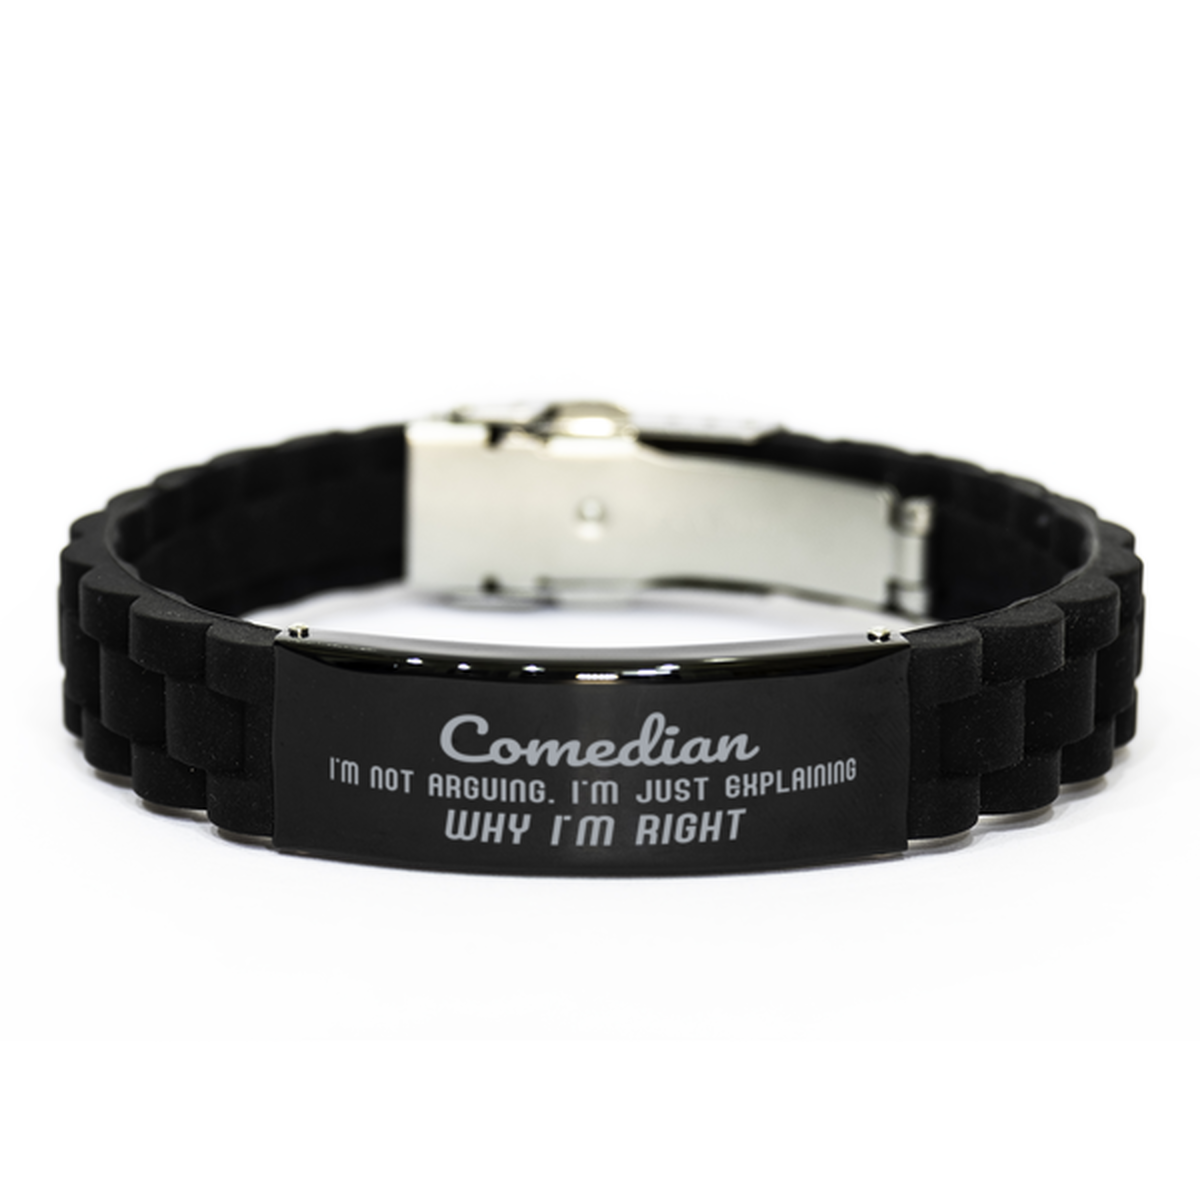 Comedian I'm not Arguing. I'm Just Explaining Why I'm RIGHT Black Glidelock Clasp Bracelet, Funny Saying Quote Comedian Gifts For Comedian Graduation Birthday Christmas Gifts for Men Women Coworker